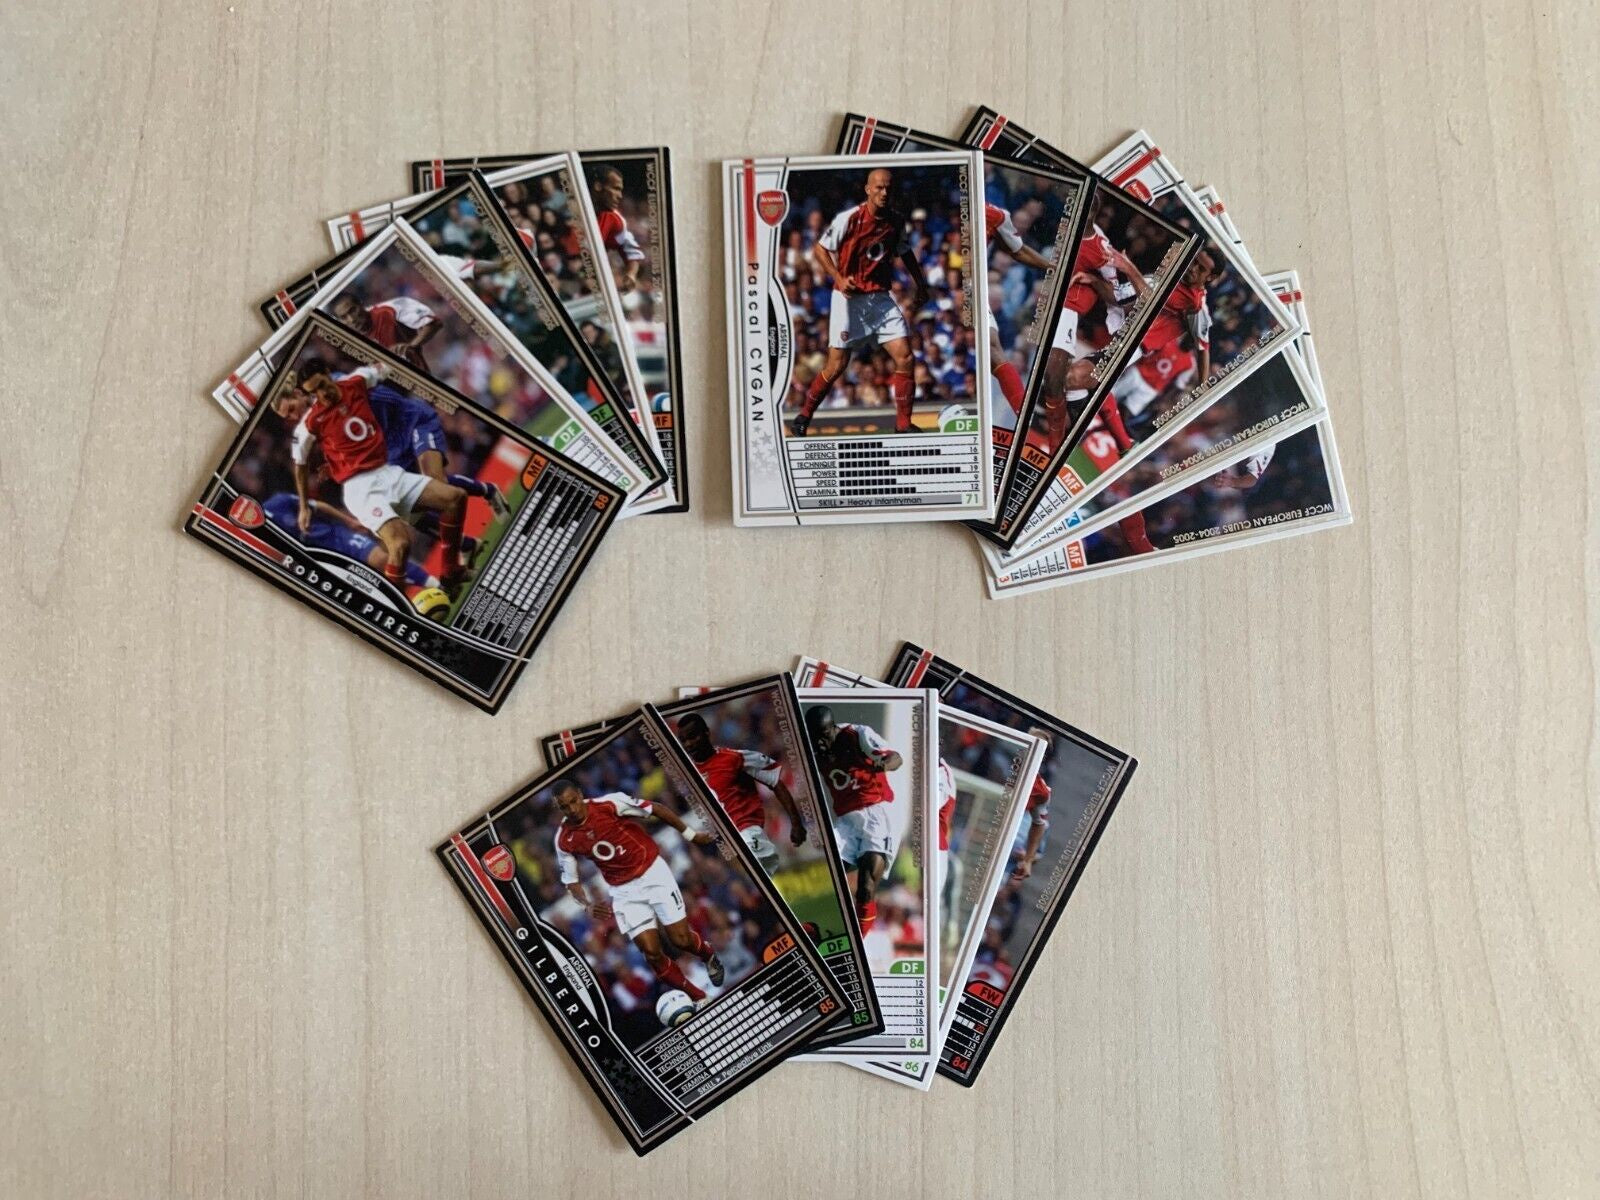 Thierry Henry  - Sports Card Single (Various National and Club Teams, Randomly Selected, May Not Be Pictured)